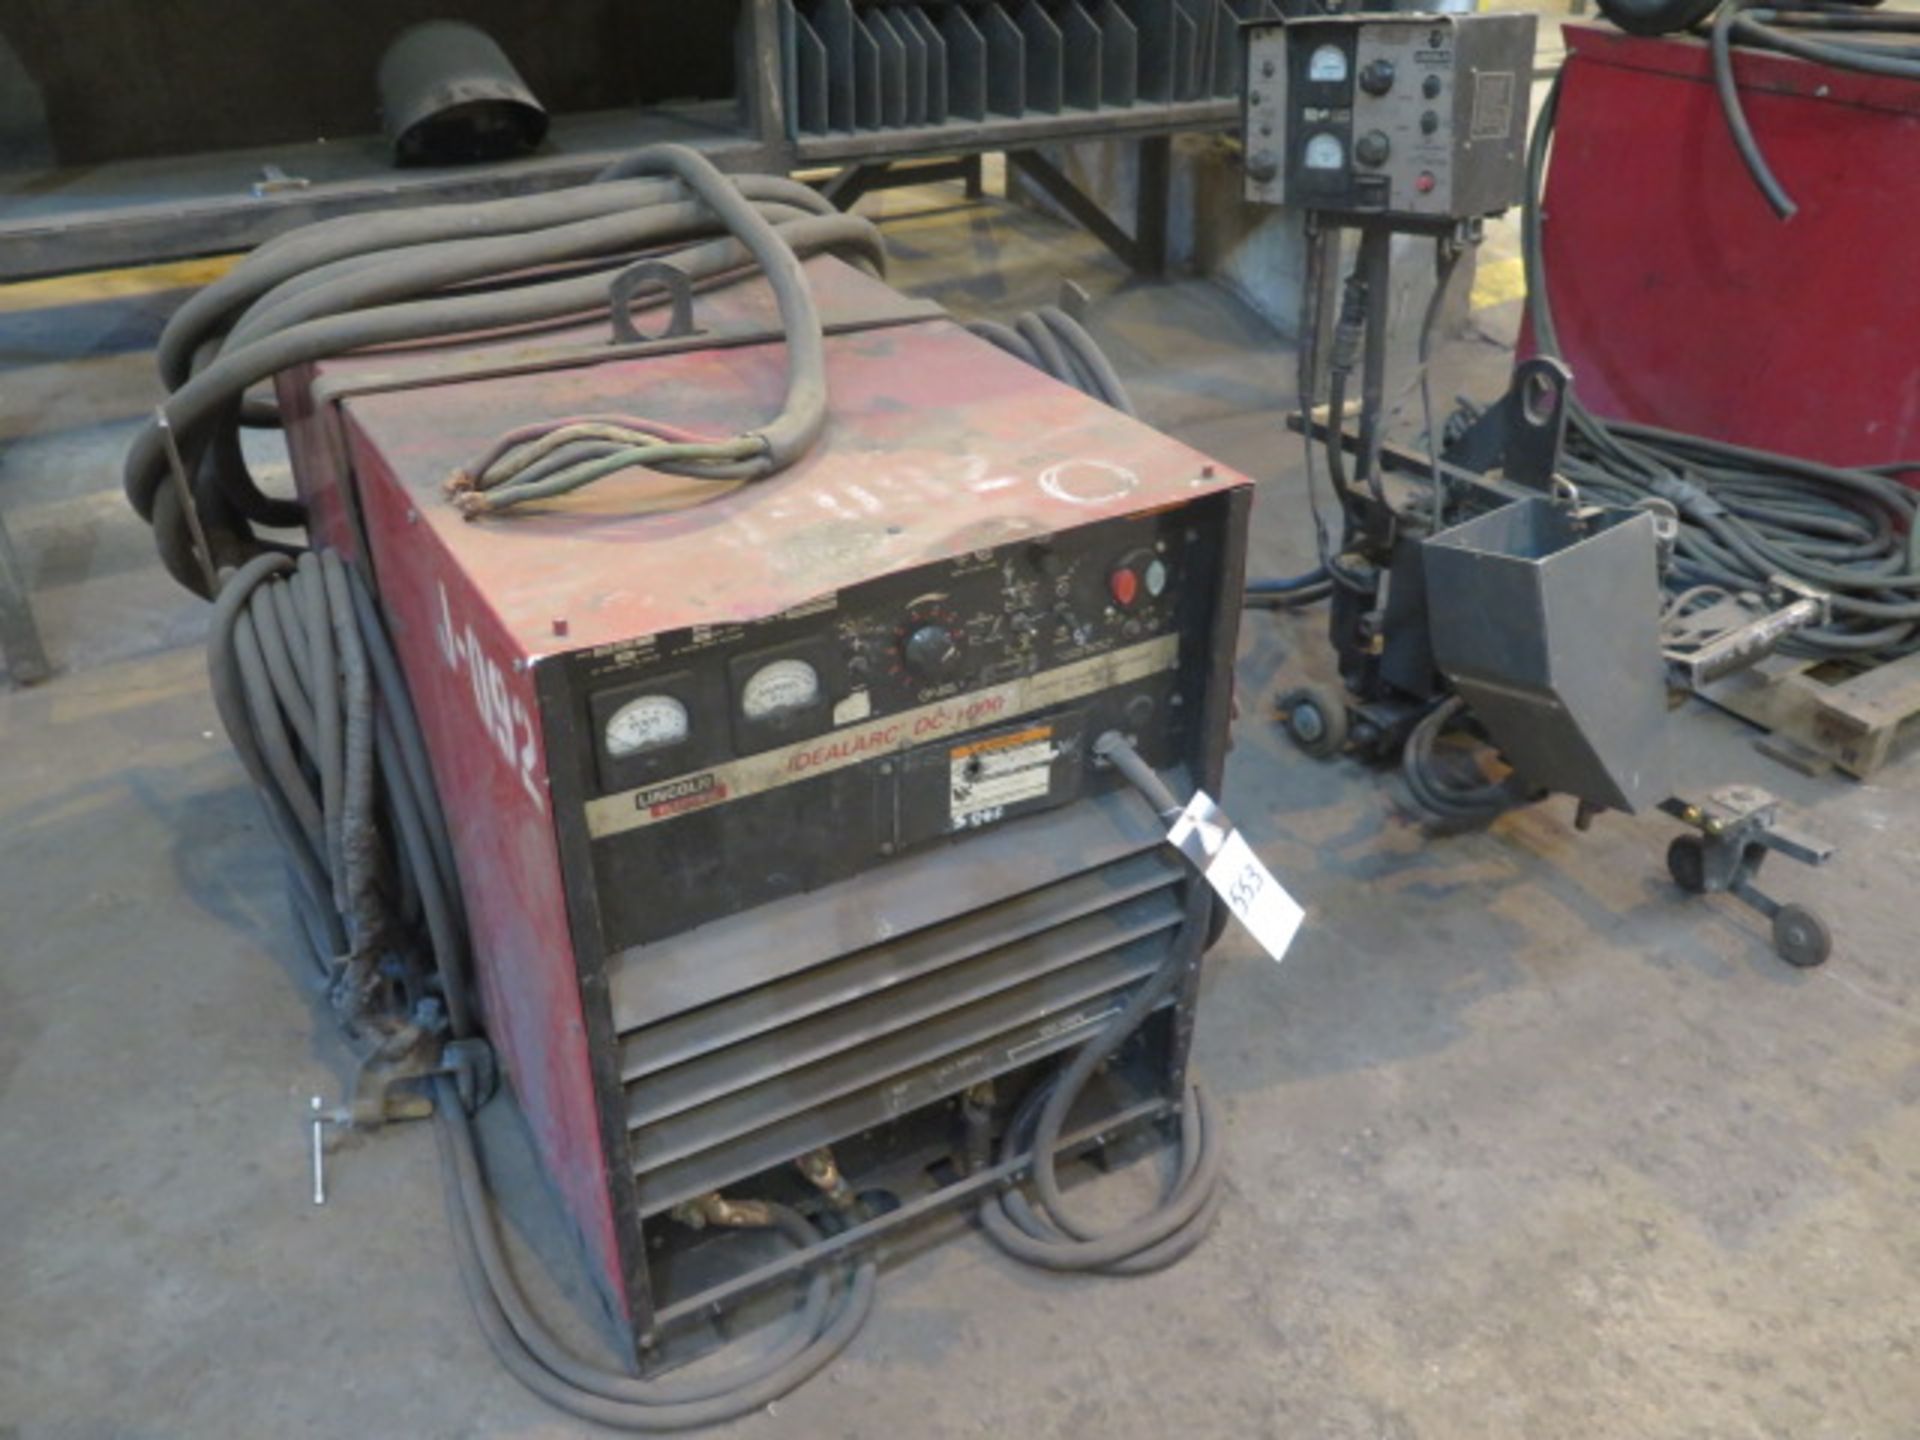 Lincoln Idealarc DC-1000 CV-CC DC Arc Welding Power Source w/ Lincoln Tracker LT-7 Submerged Arc - Image 2 of 4